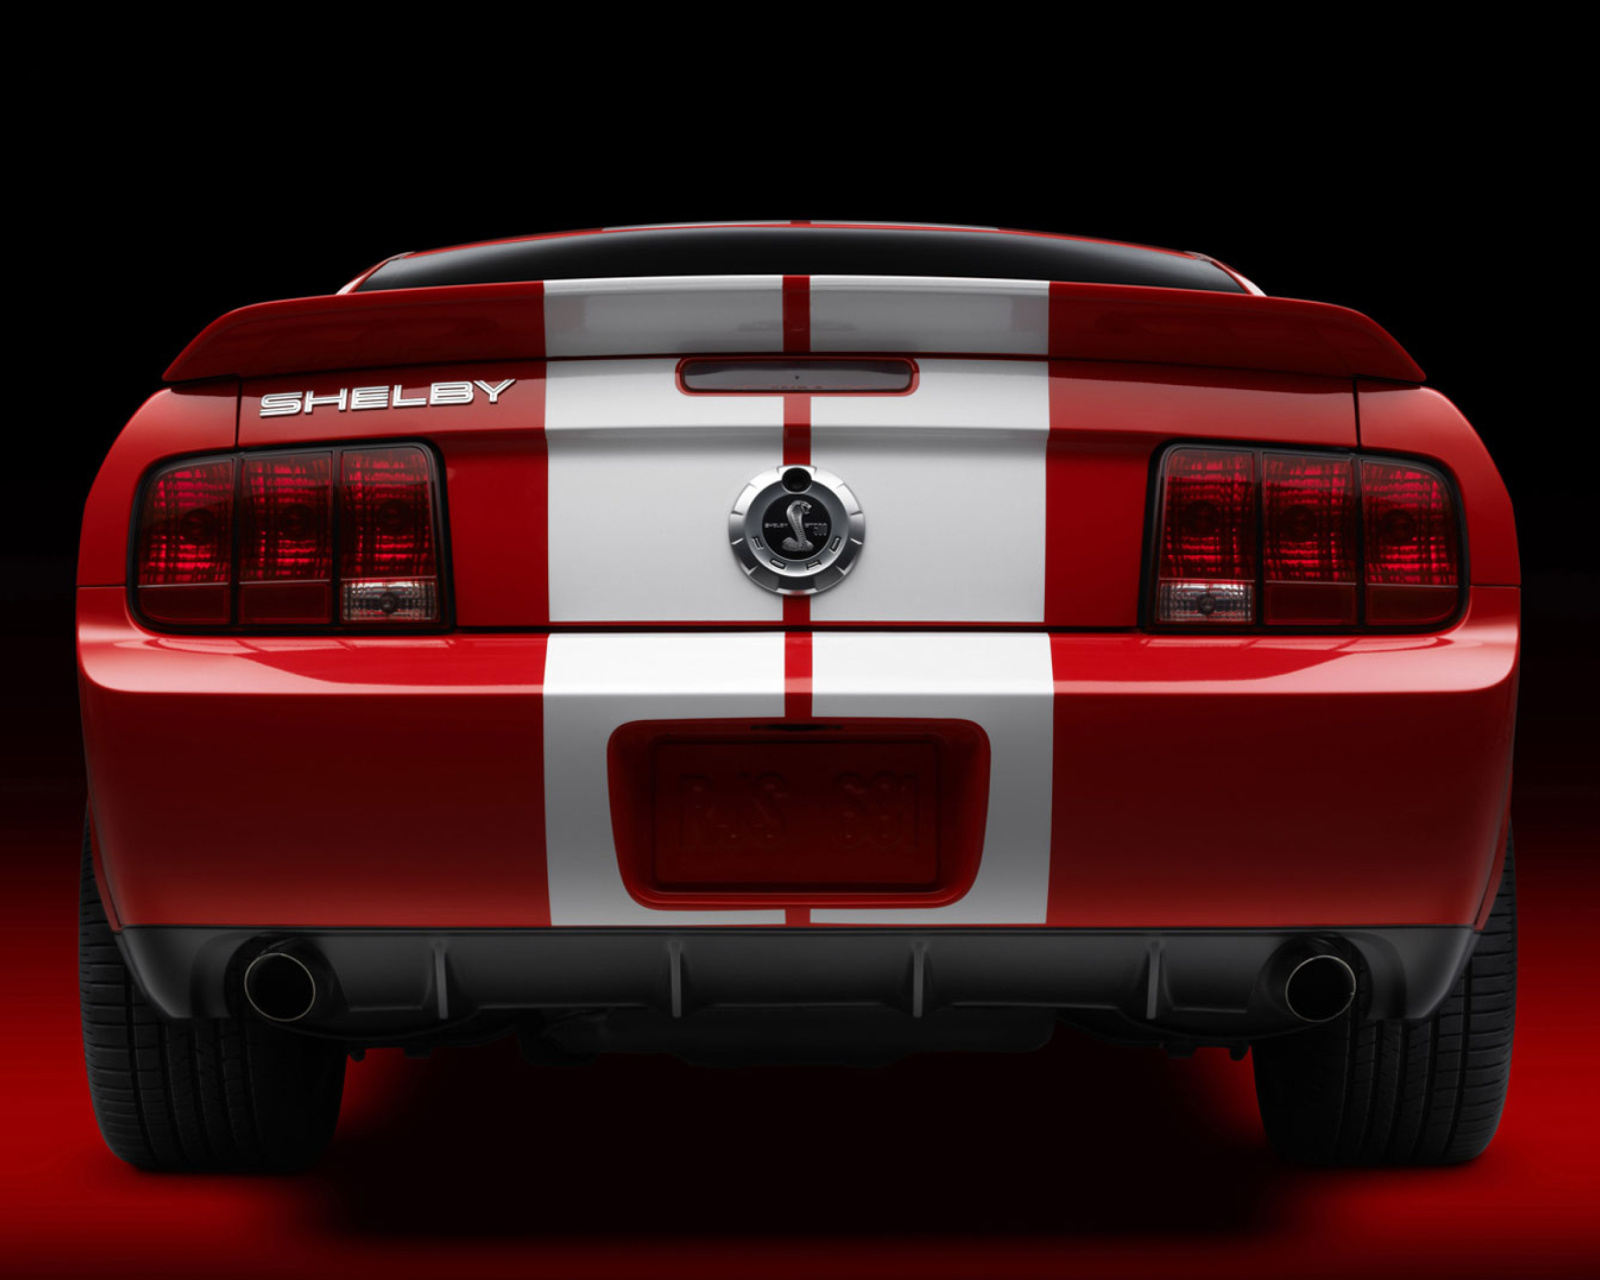 Das Ford Mustang Shelby GT500 Wallpaper 1600x1280